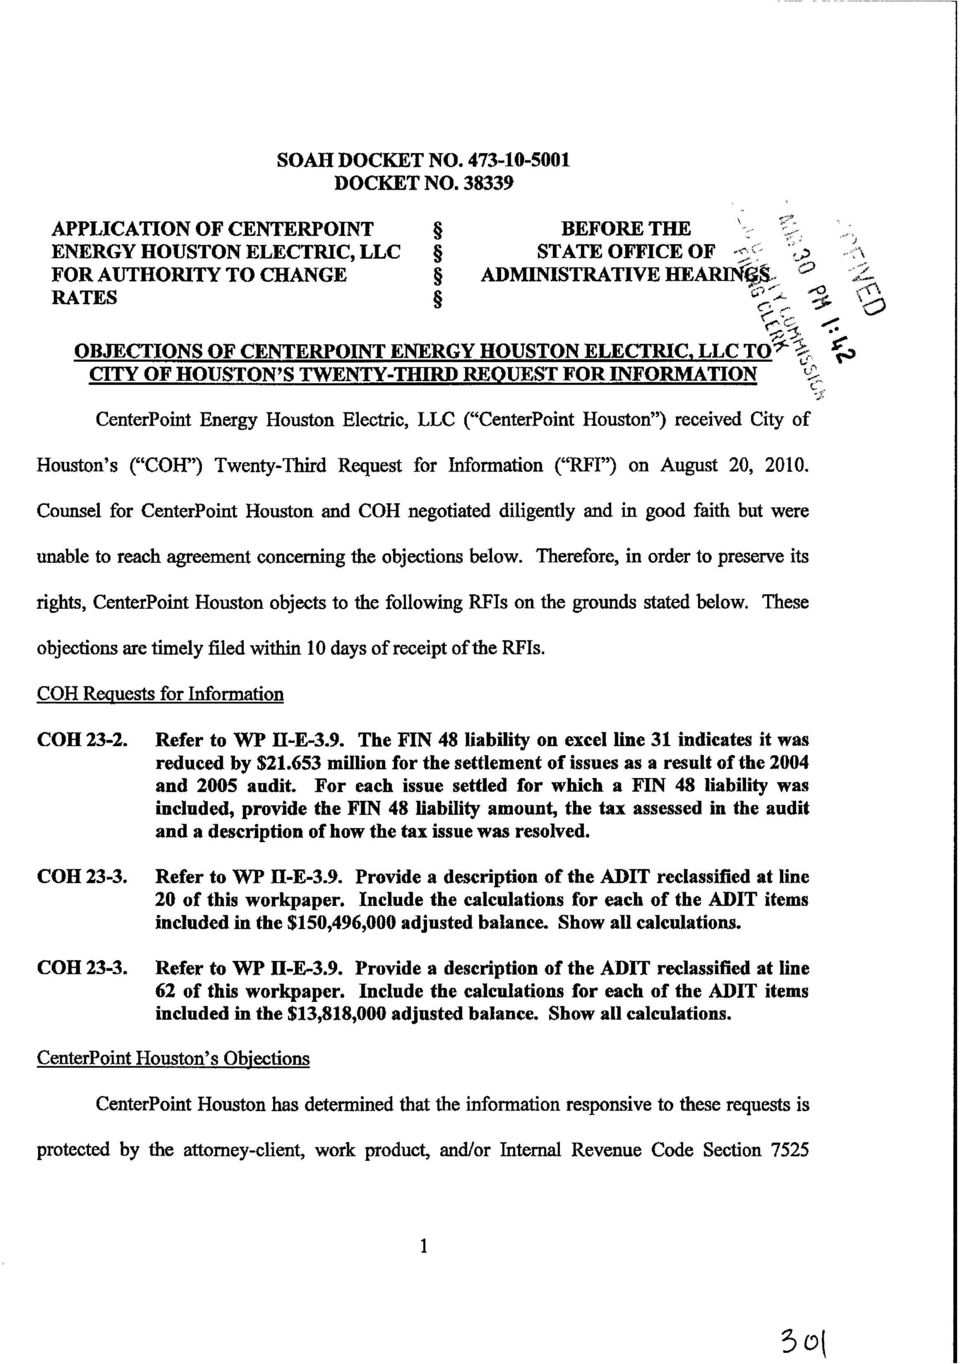 City of Houston's ("COH") Twenty-Third Request for Information ("Rb'I") on August 20, 2010.